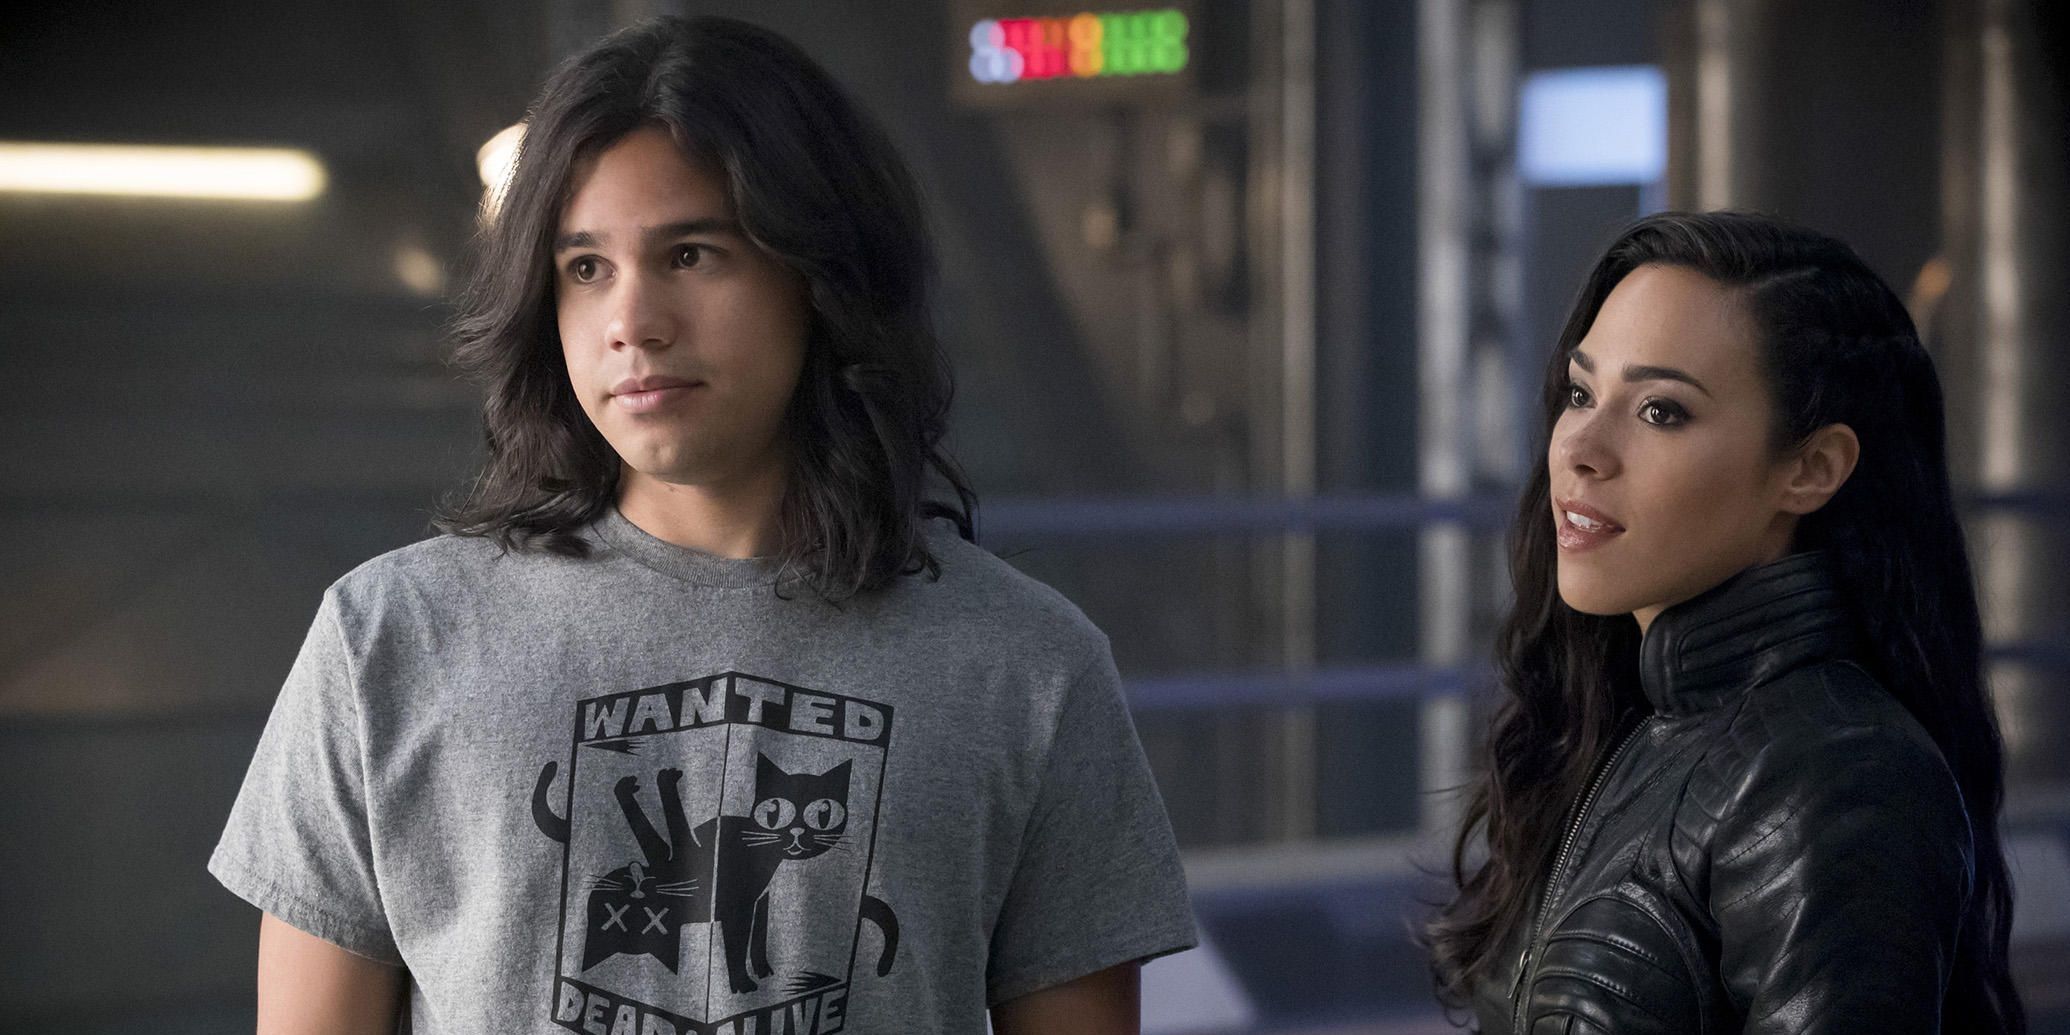 Cisco and Gypsy stand side by side in The Flash